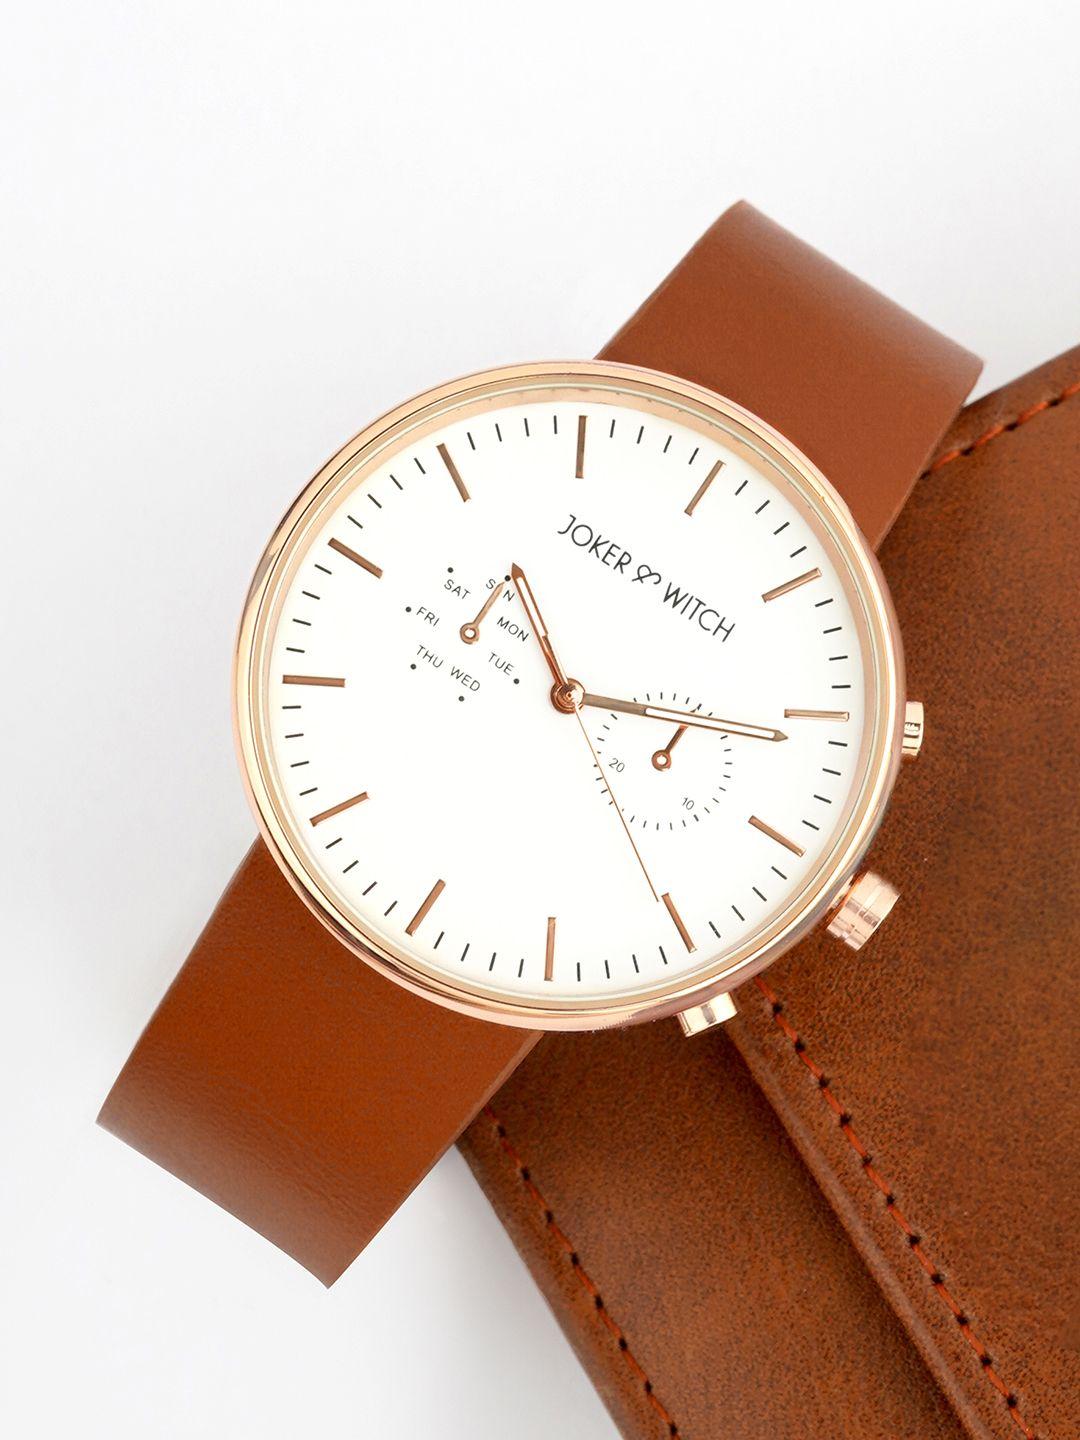 joker-&-witch-men-white-patterned-dial-&-brown-leather-textured-straps-analogue-watch